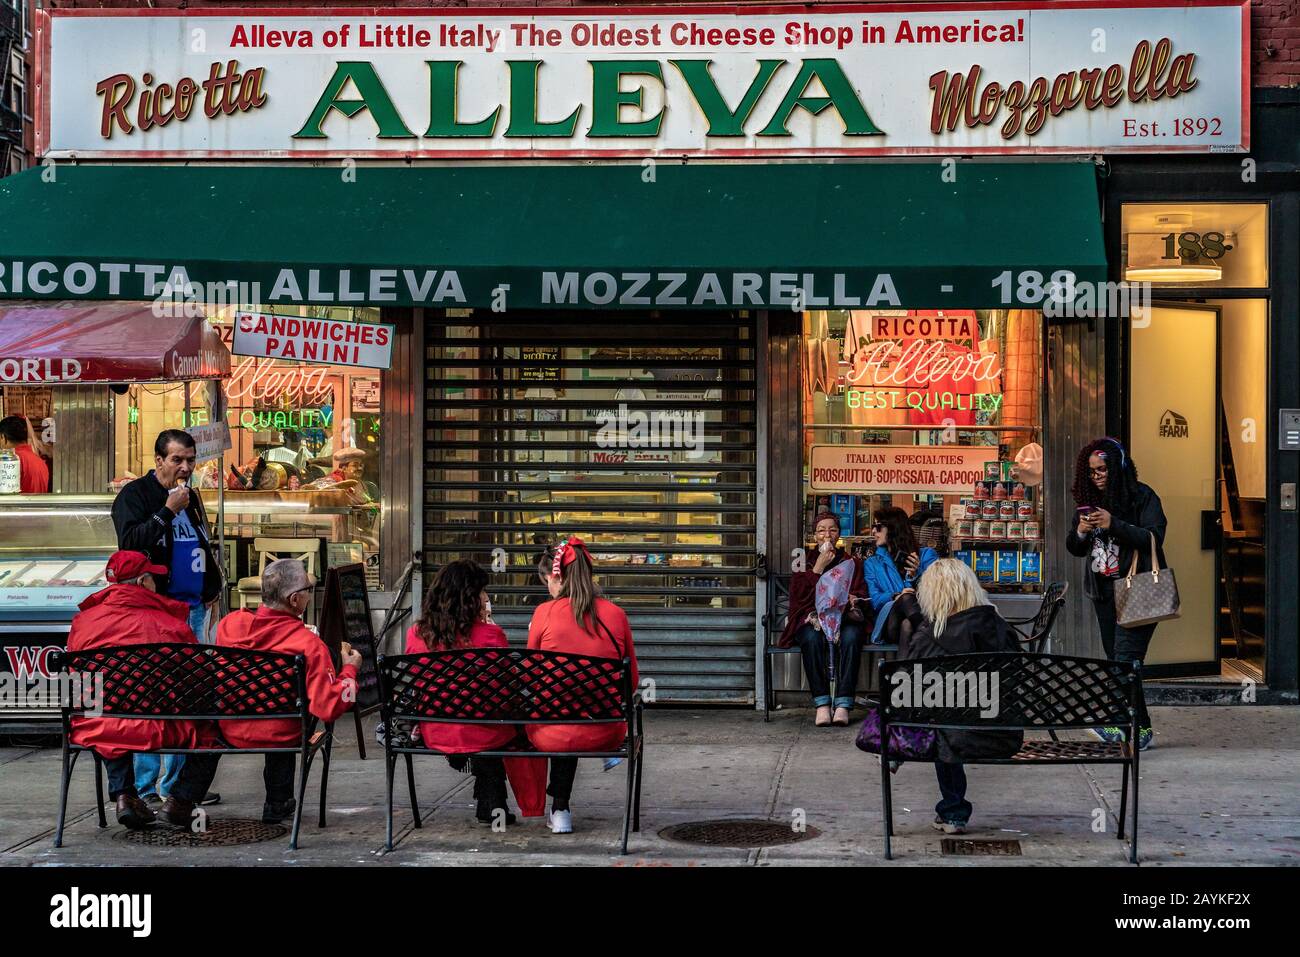 NEW YORK, USA - OCTOBER 14: This is a street scene of people sitting outside Alleva, the oldest cheese shop in America on October 14, 2019 in New York Stock Photo